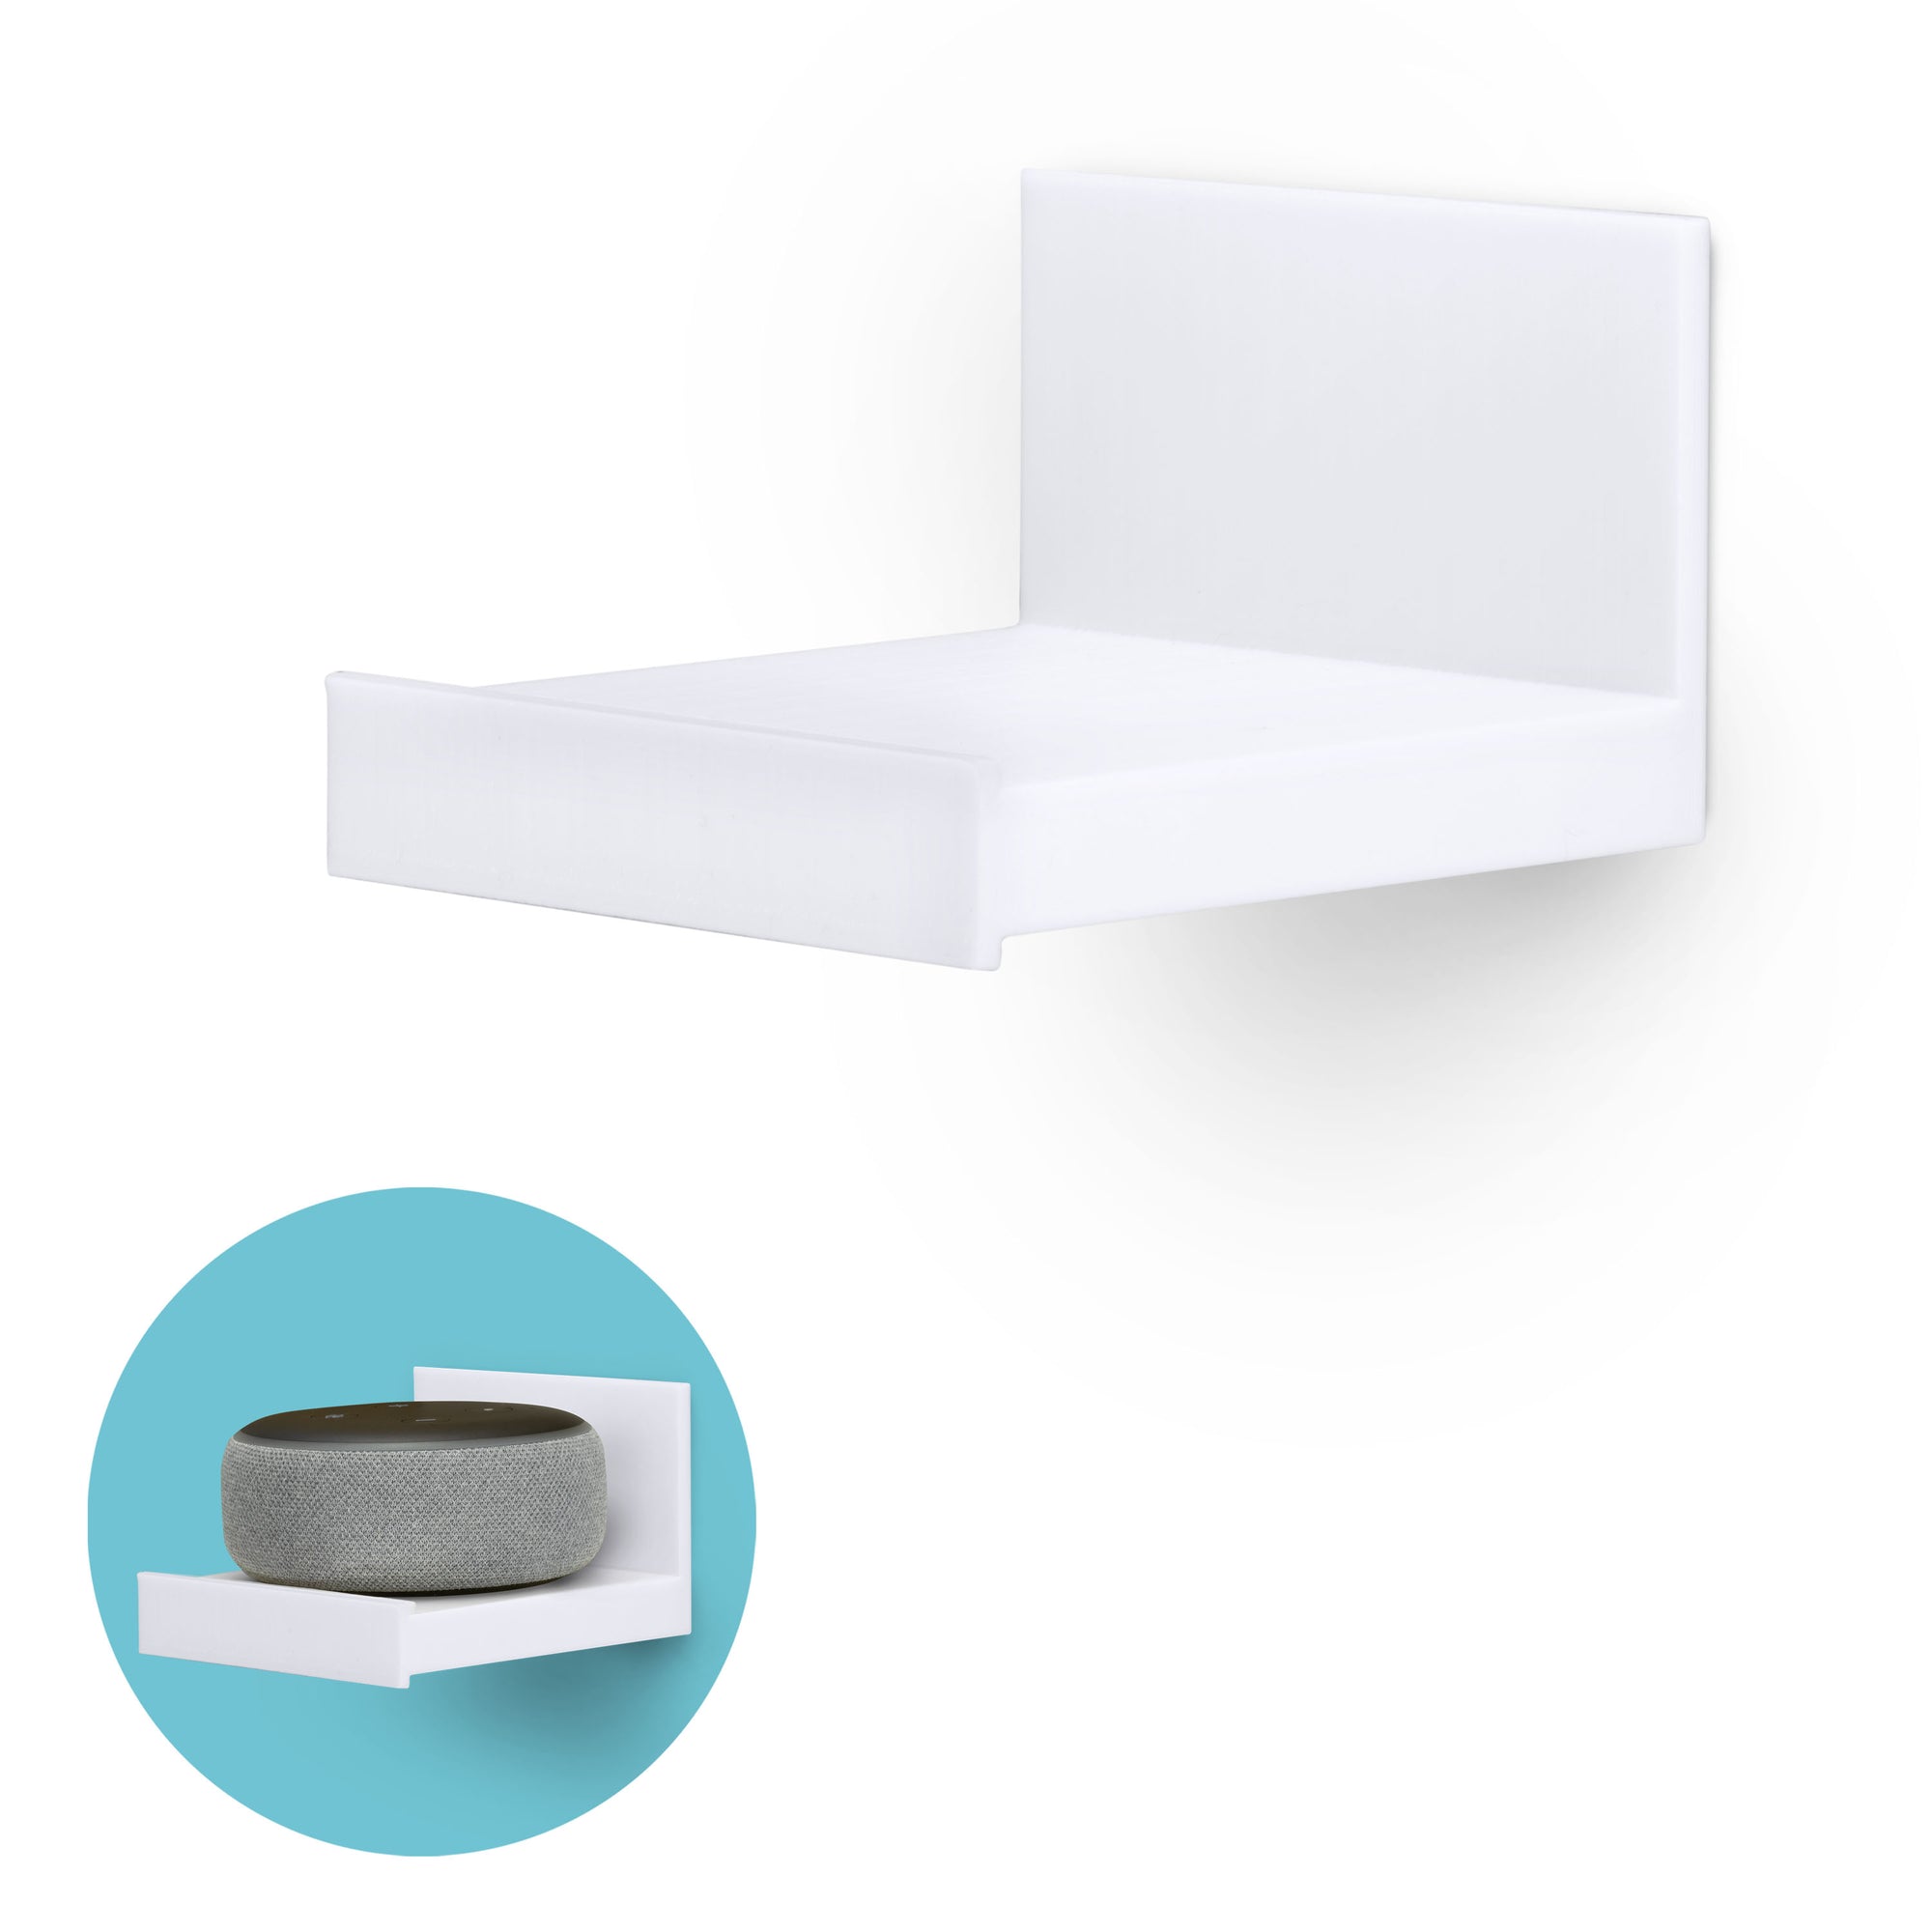 4" Adhesive Universal Small Floating Shelf (135) for Security Cameras, Small Plants, Storage & More